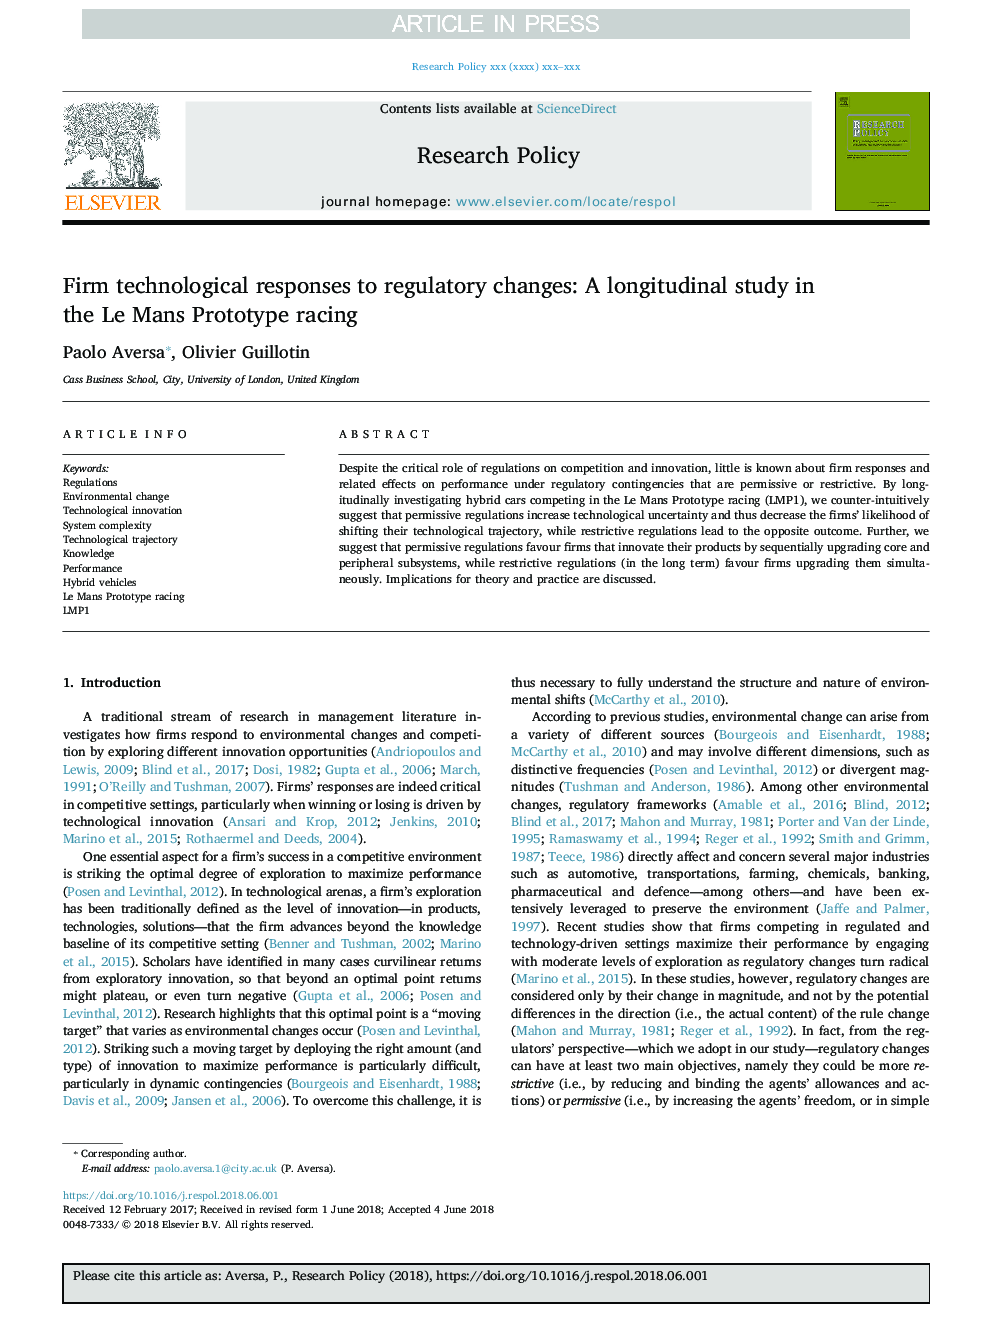 Firm technological responses to regulatory changes: A longitudinal study in the Le Mans Prototype racing